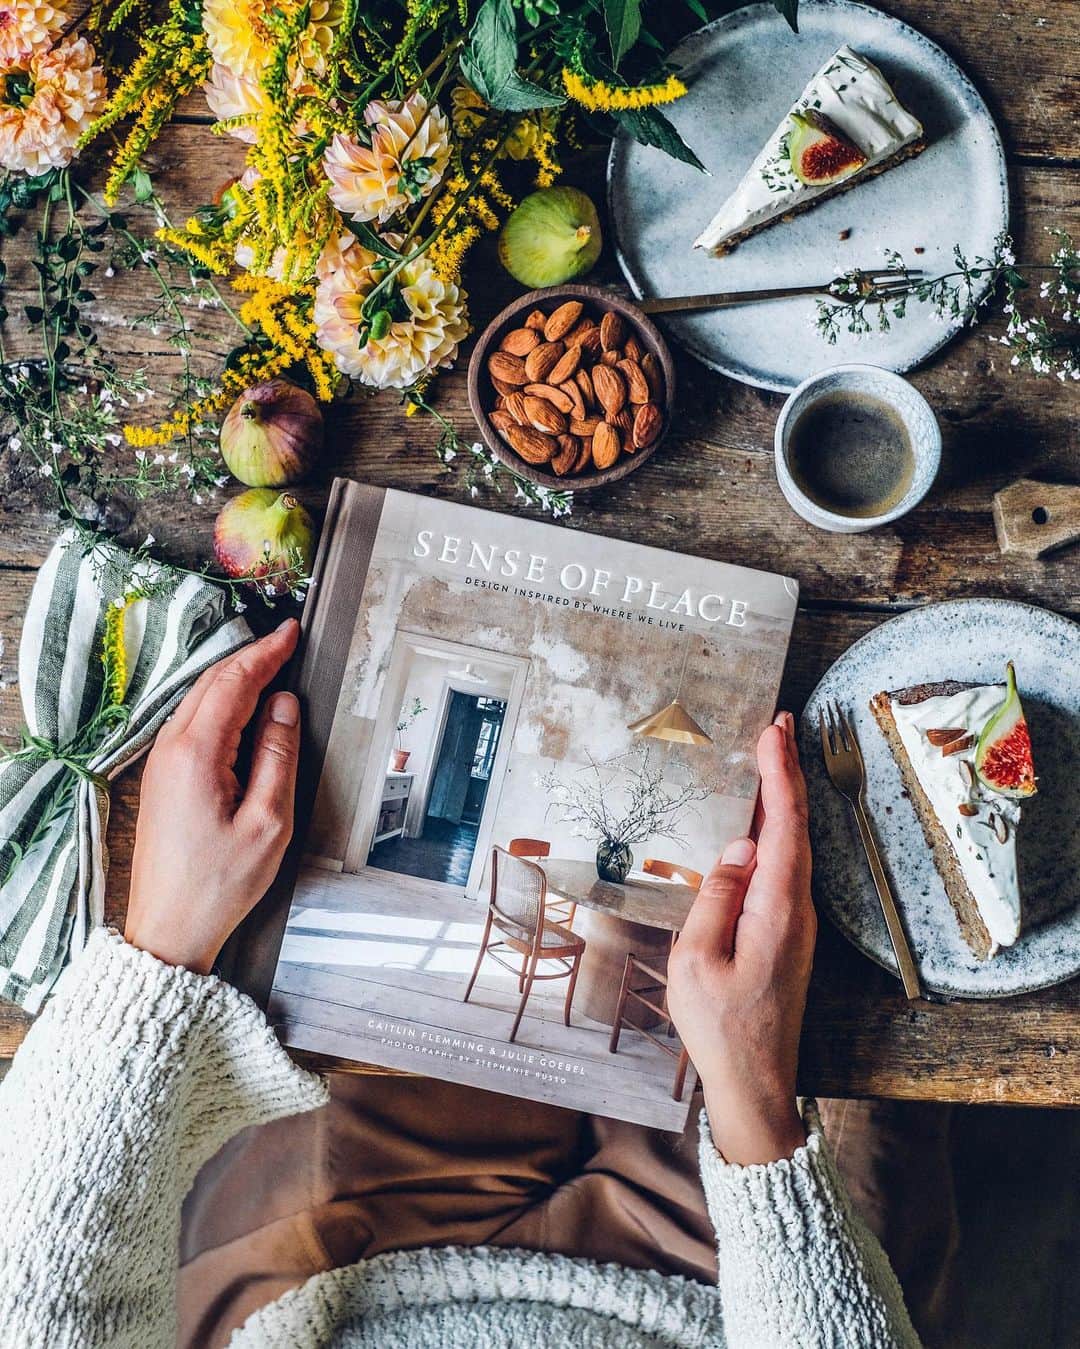 Our Food Storiesのインスタグラム：「We are so excited to see our home on the cover of @caitlinflemming & @globalatelier new book Sense of Place - beautifully photographed by @stephaniecrusso ✨ Thanks so much for including us next to so many other inspiring homes 🙏 ______ #senseofplace #onthetable #autumncake #glutenfri #glutenfrei #glutenfreerecipes #foodstylist #foodphotographer #momentslikethese #autumnmood #coffeetablebook #designbooks #ourfoodstoriesstudio #bücherliebe #gatheringslikethese #interiorbooks」